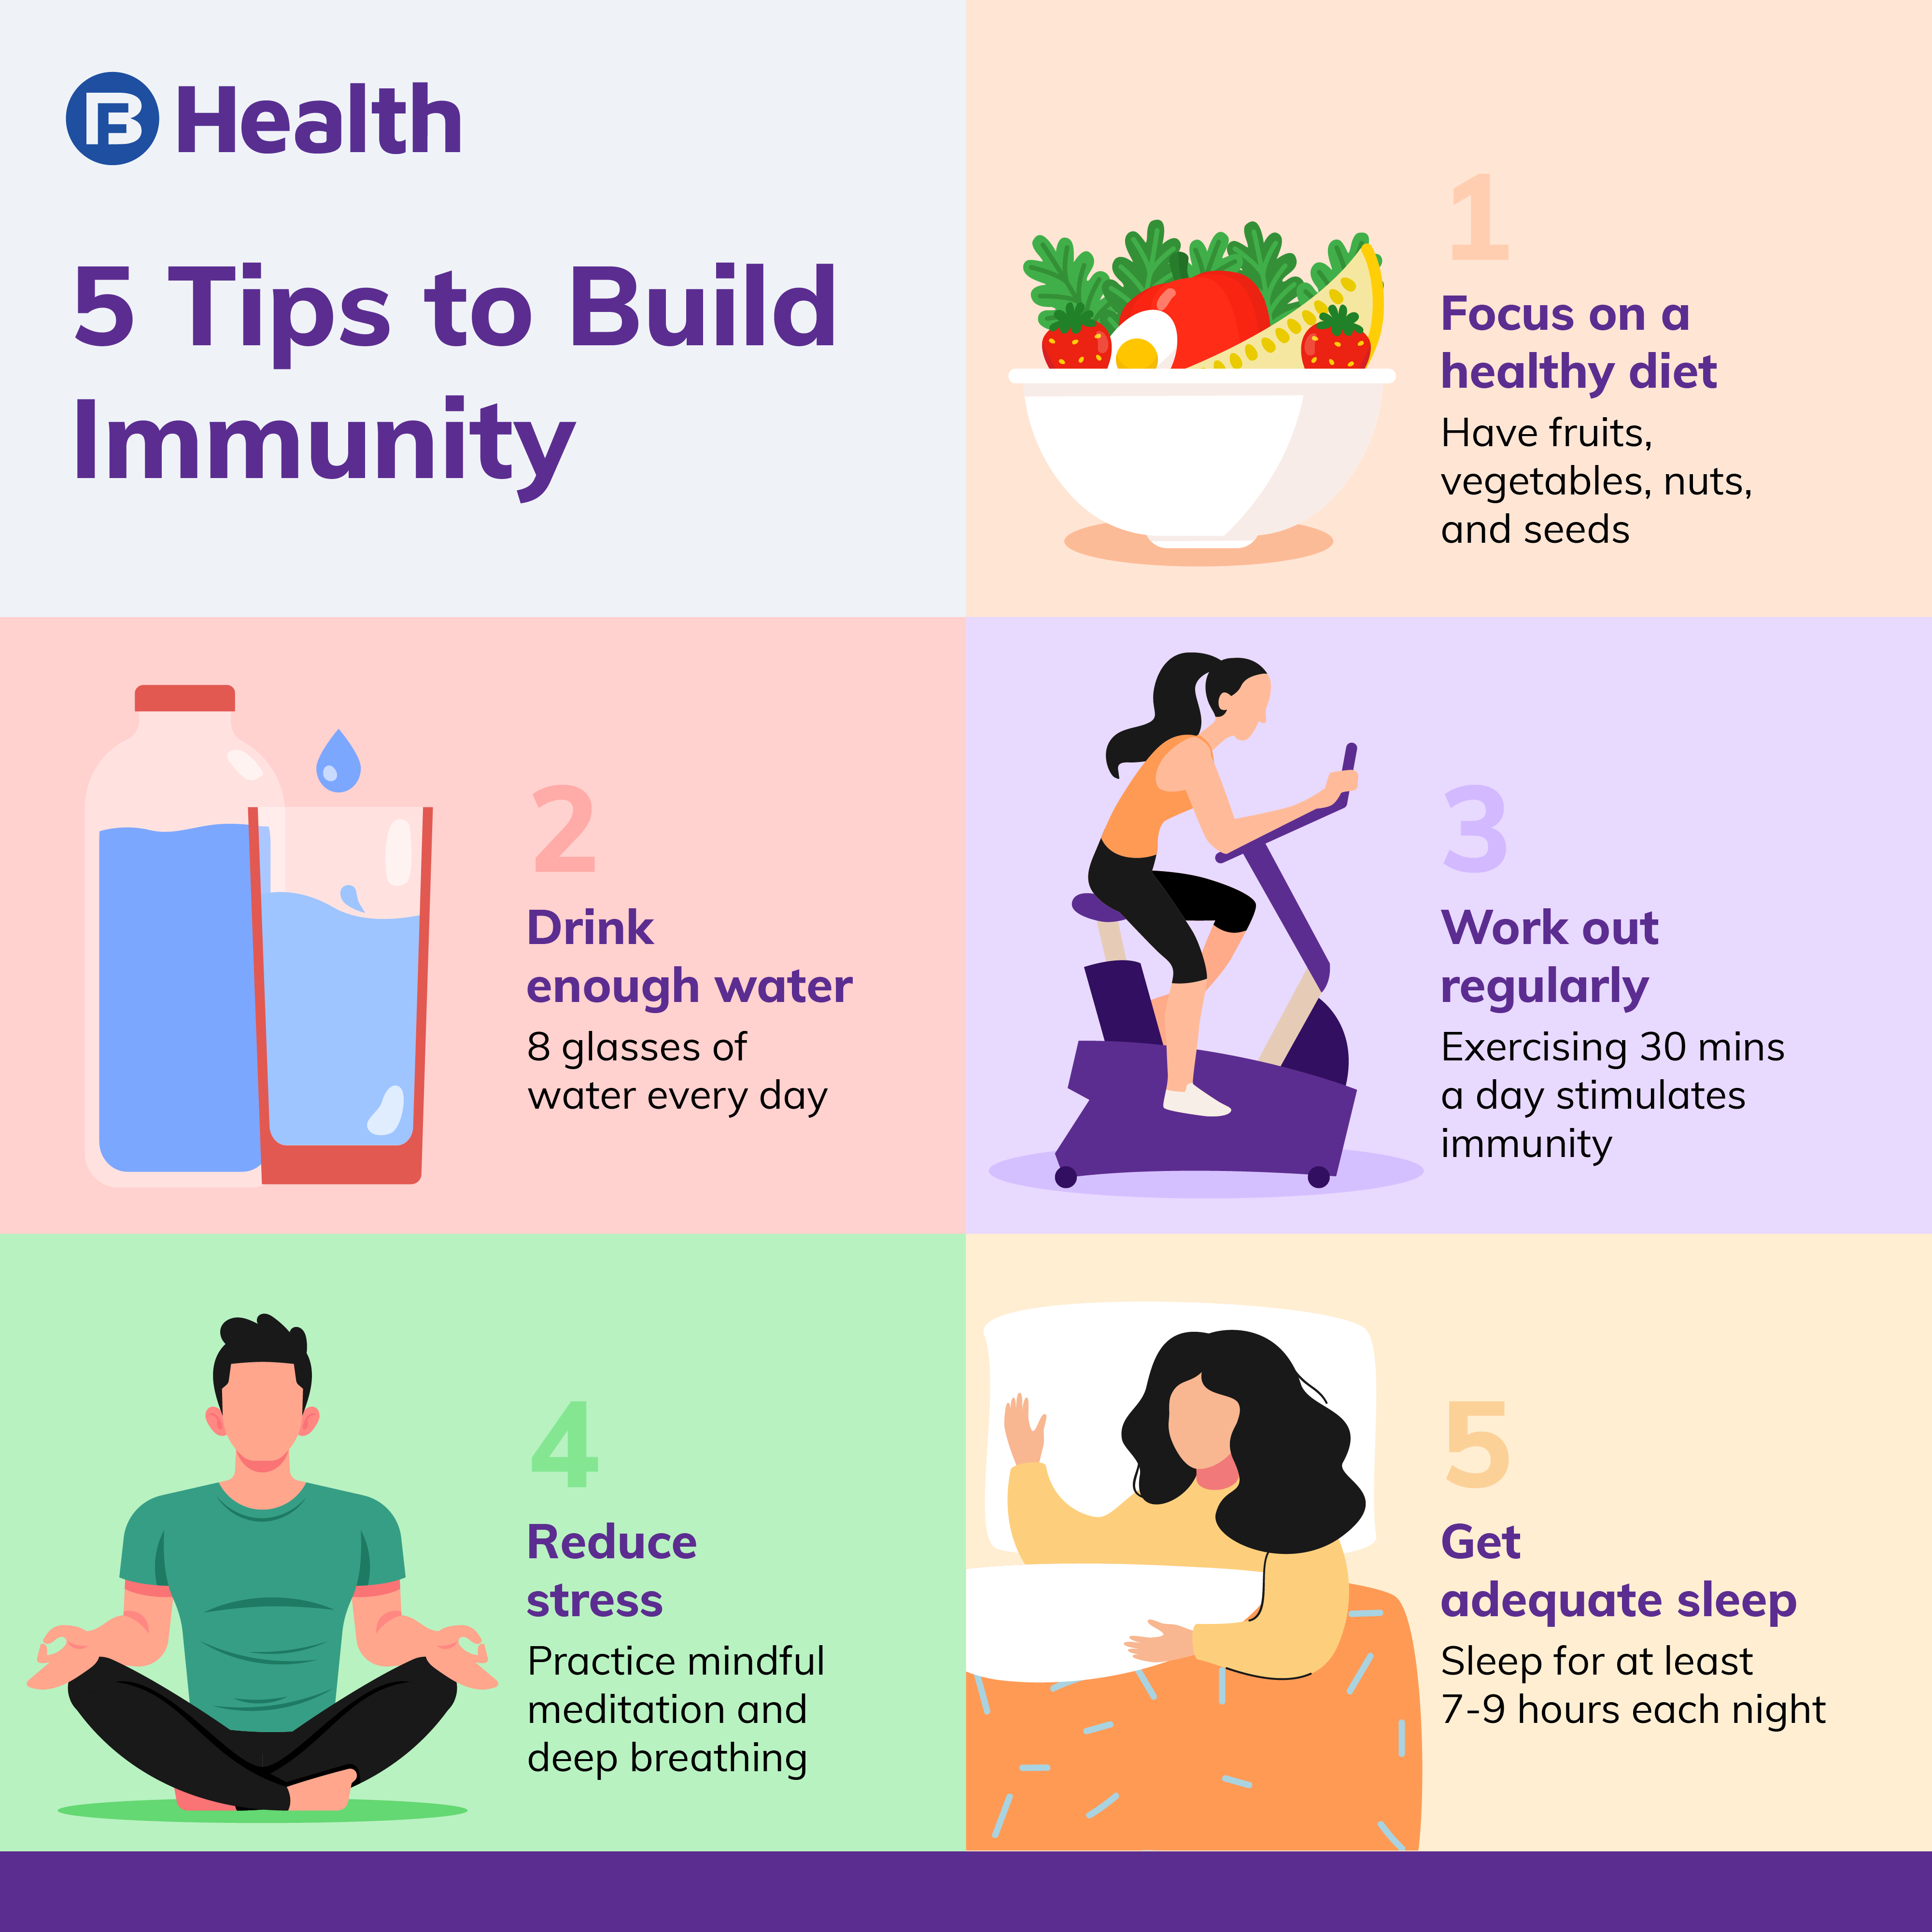 Tips to build immunity